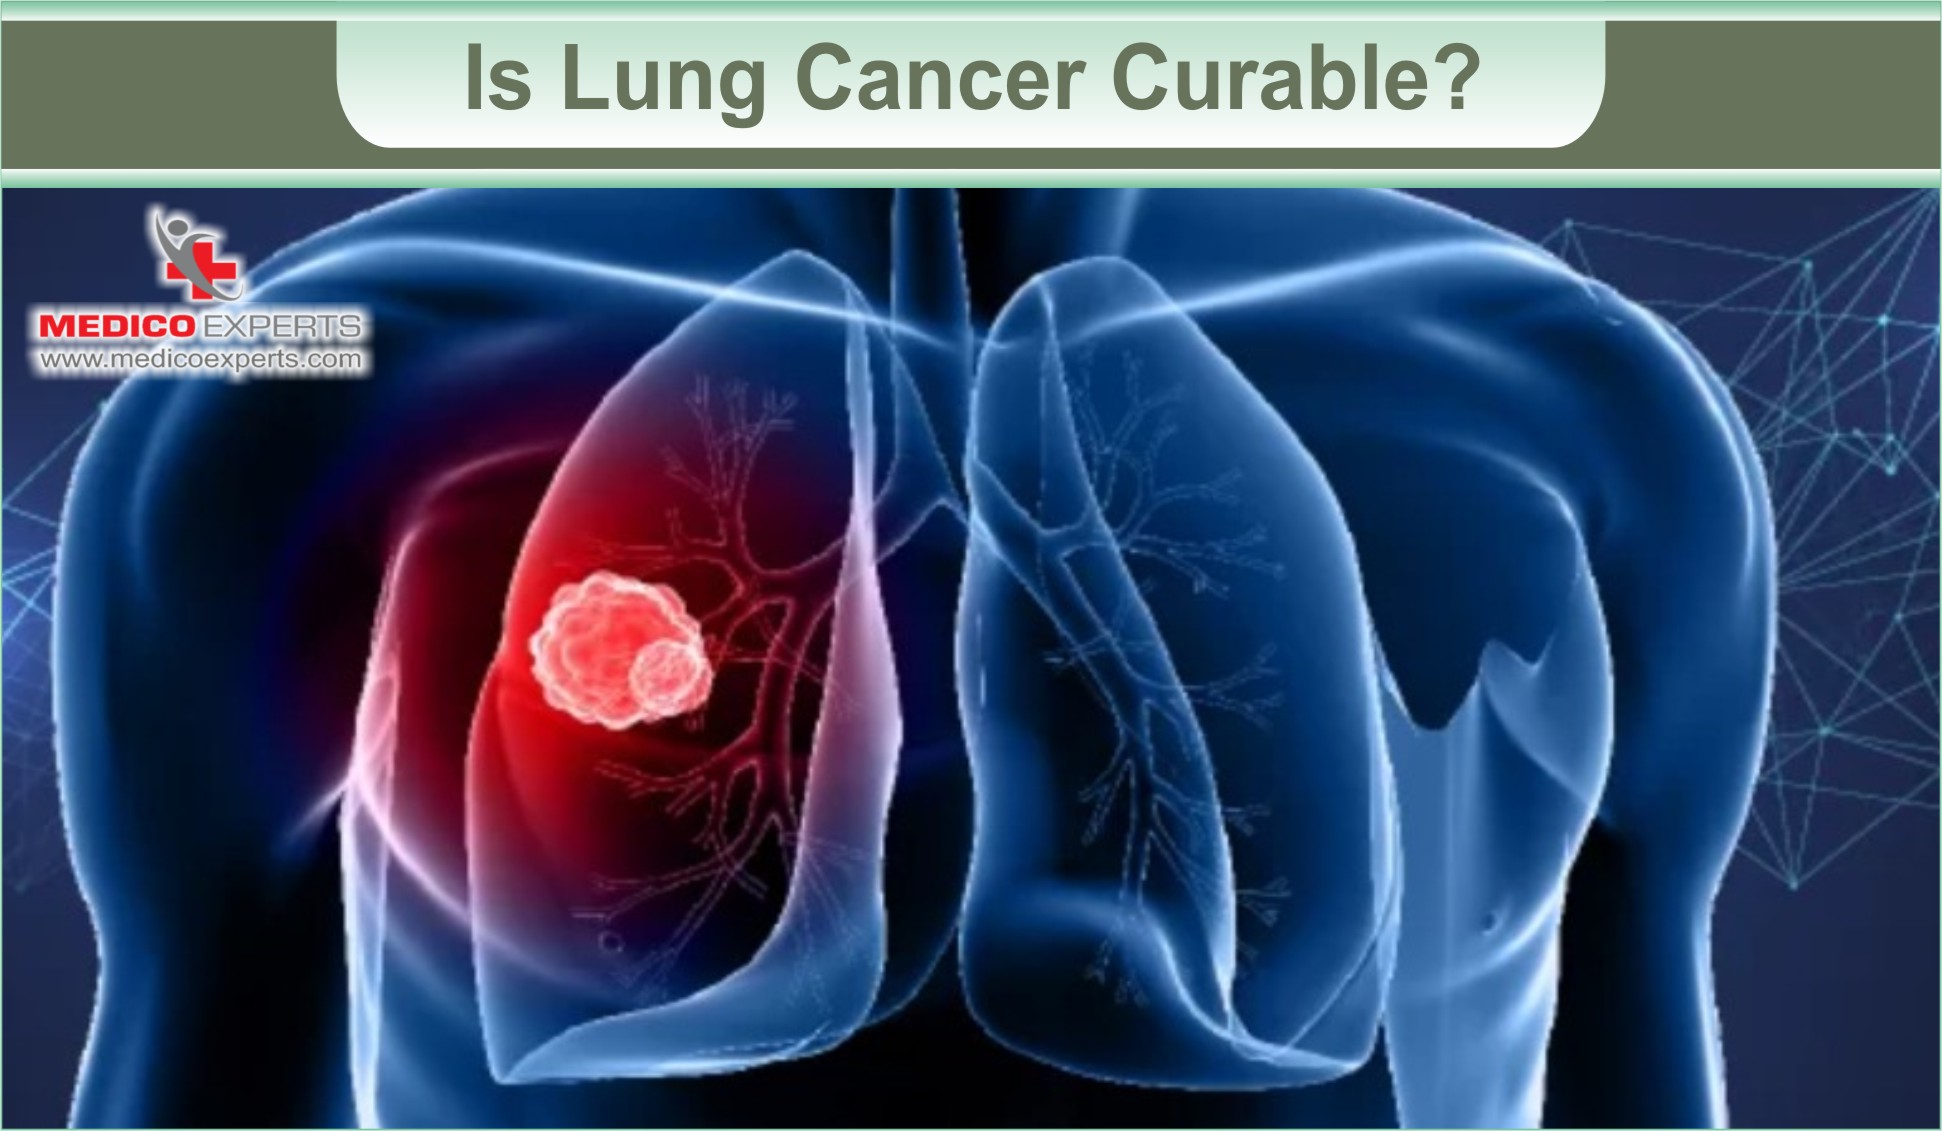 Is lung cancer curable with advanced therapies?